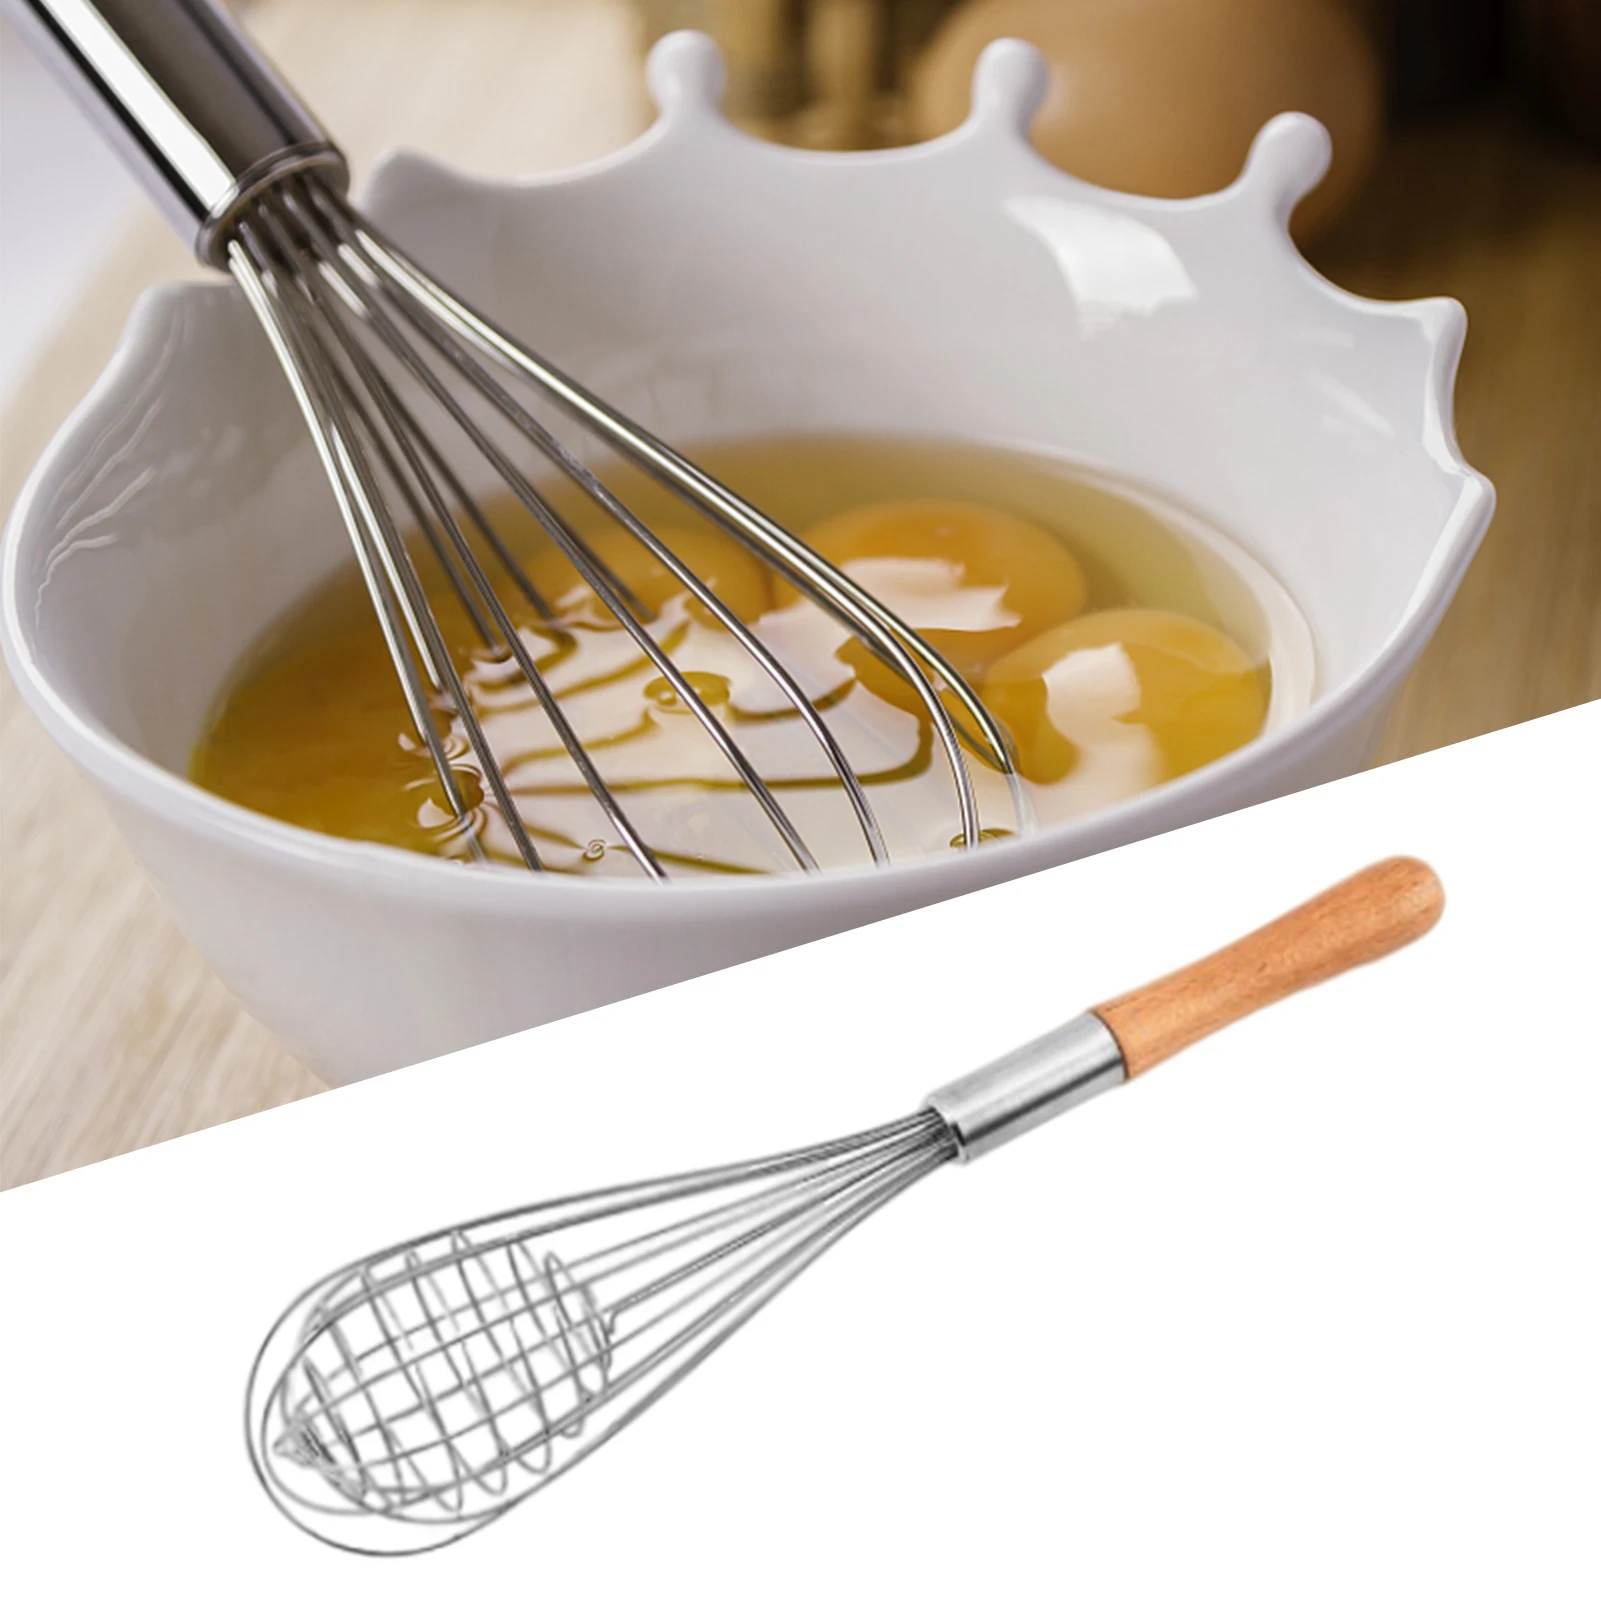 

Kitchen Whisk Manual Whisk Stainless Steel Baking Hand Blender Wooden Handle Manual Butter Butter Flour Mixing Kitchen Mixer